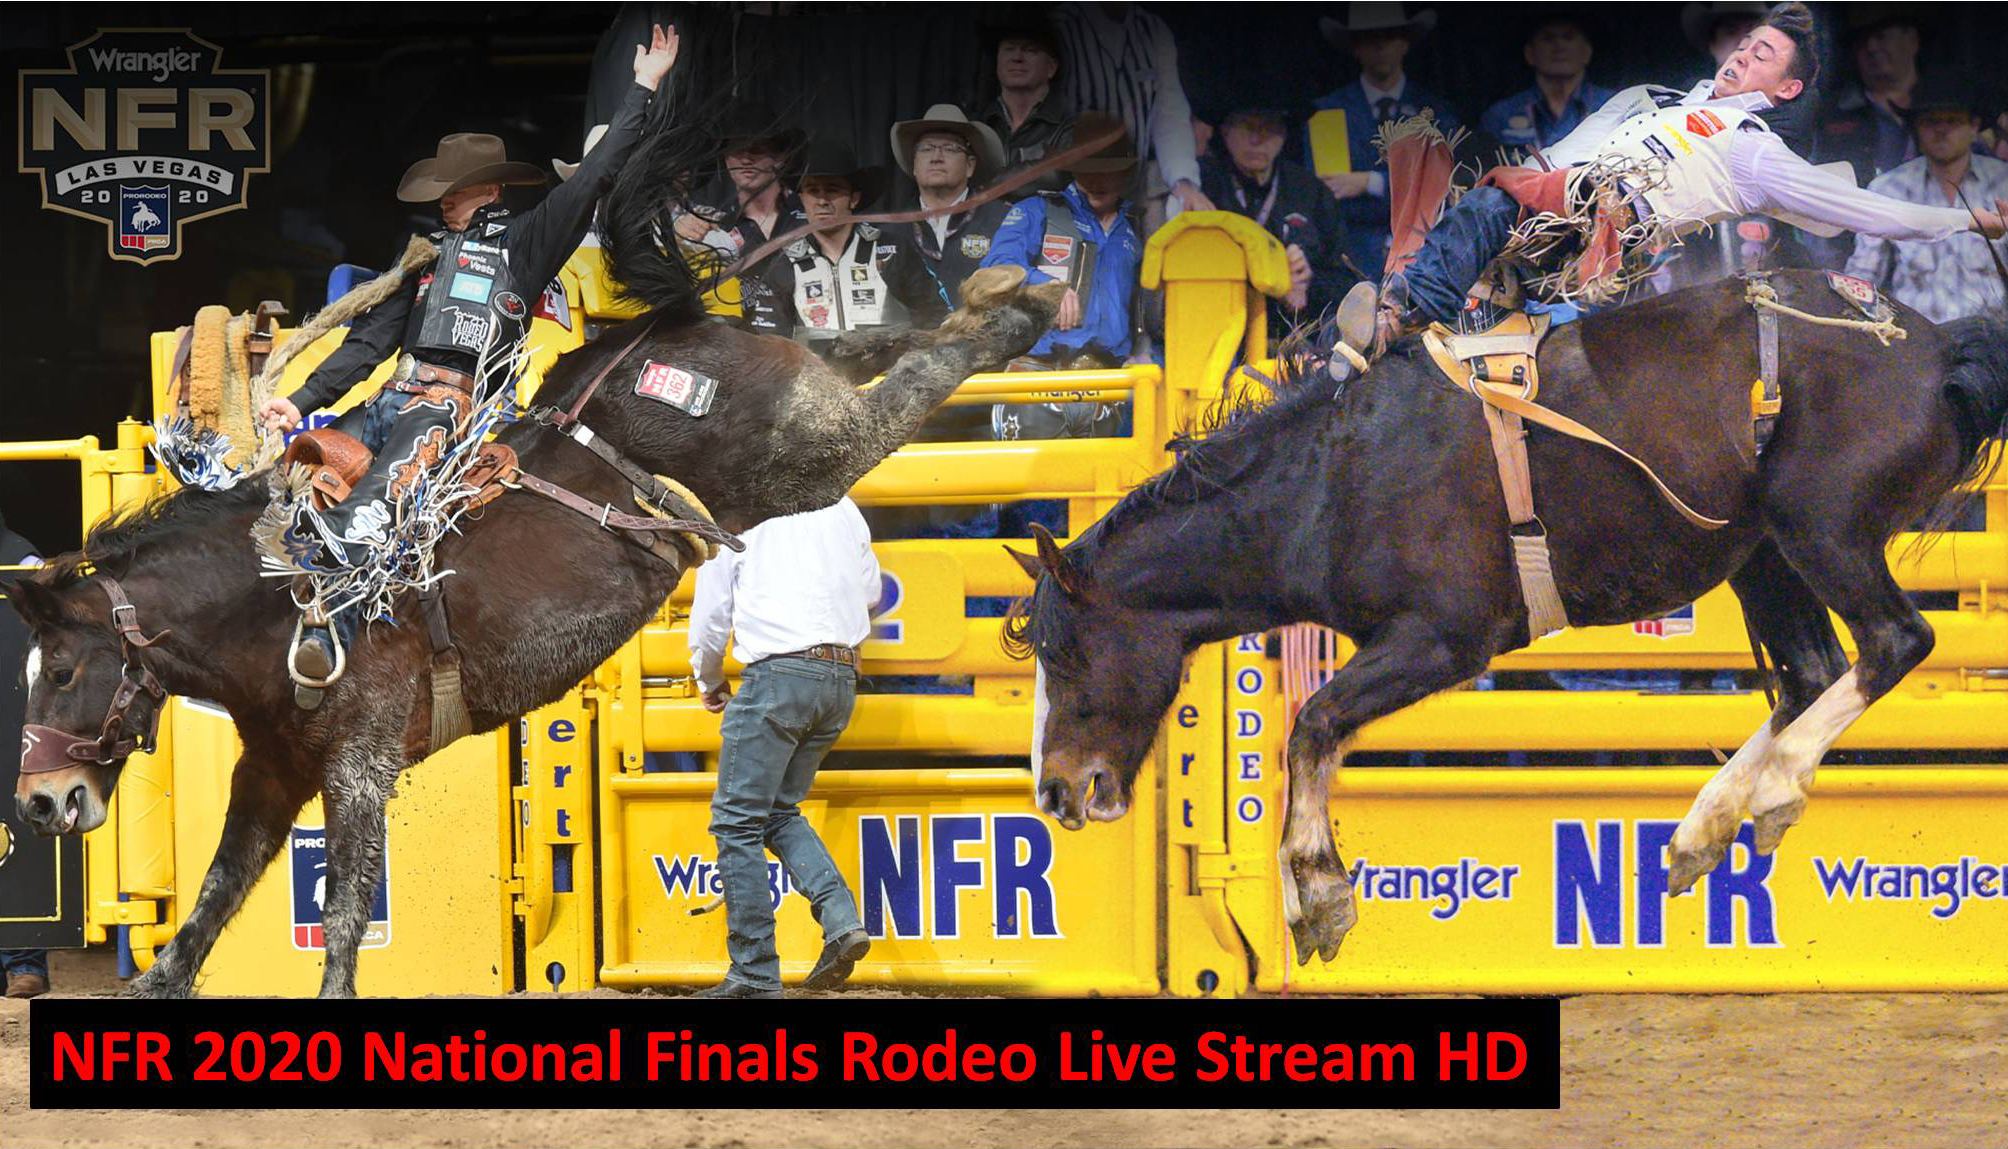 National Finals Rodeo (NFR 2020) Live Stream Reddit Free where to